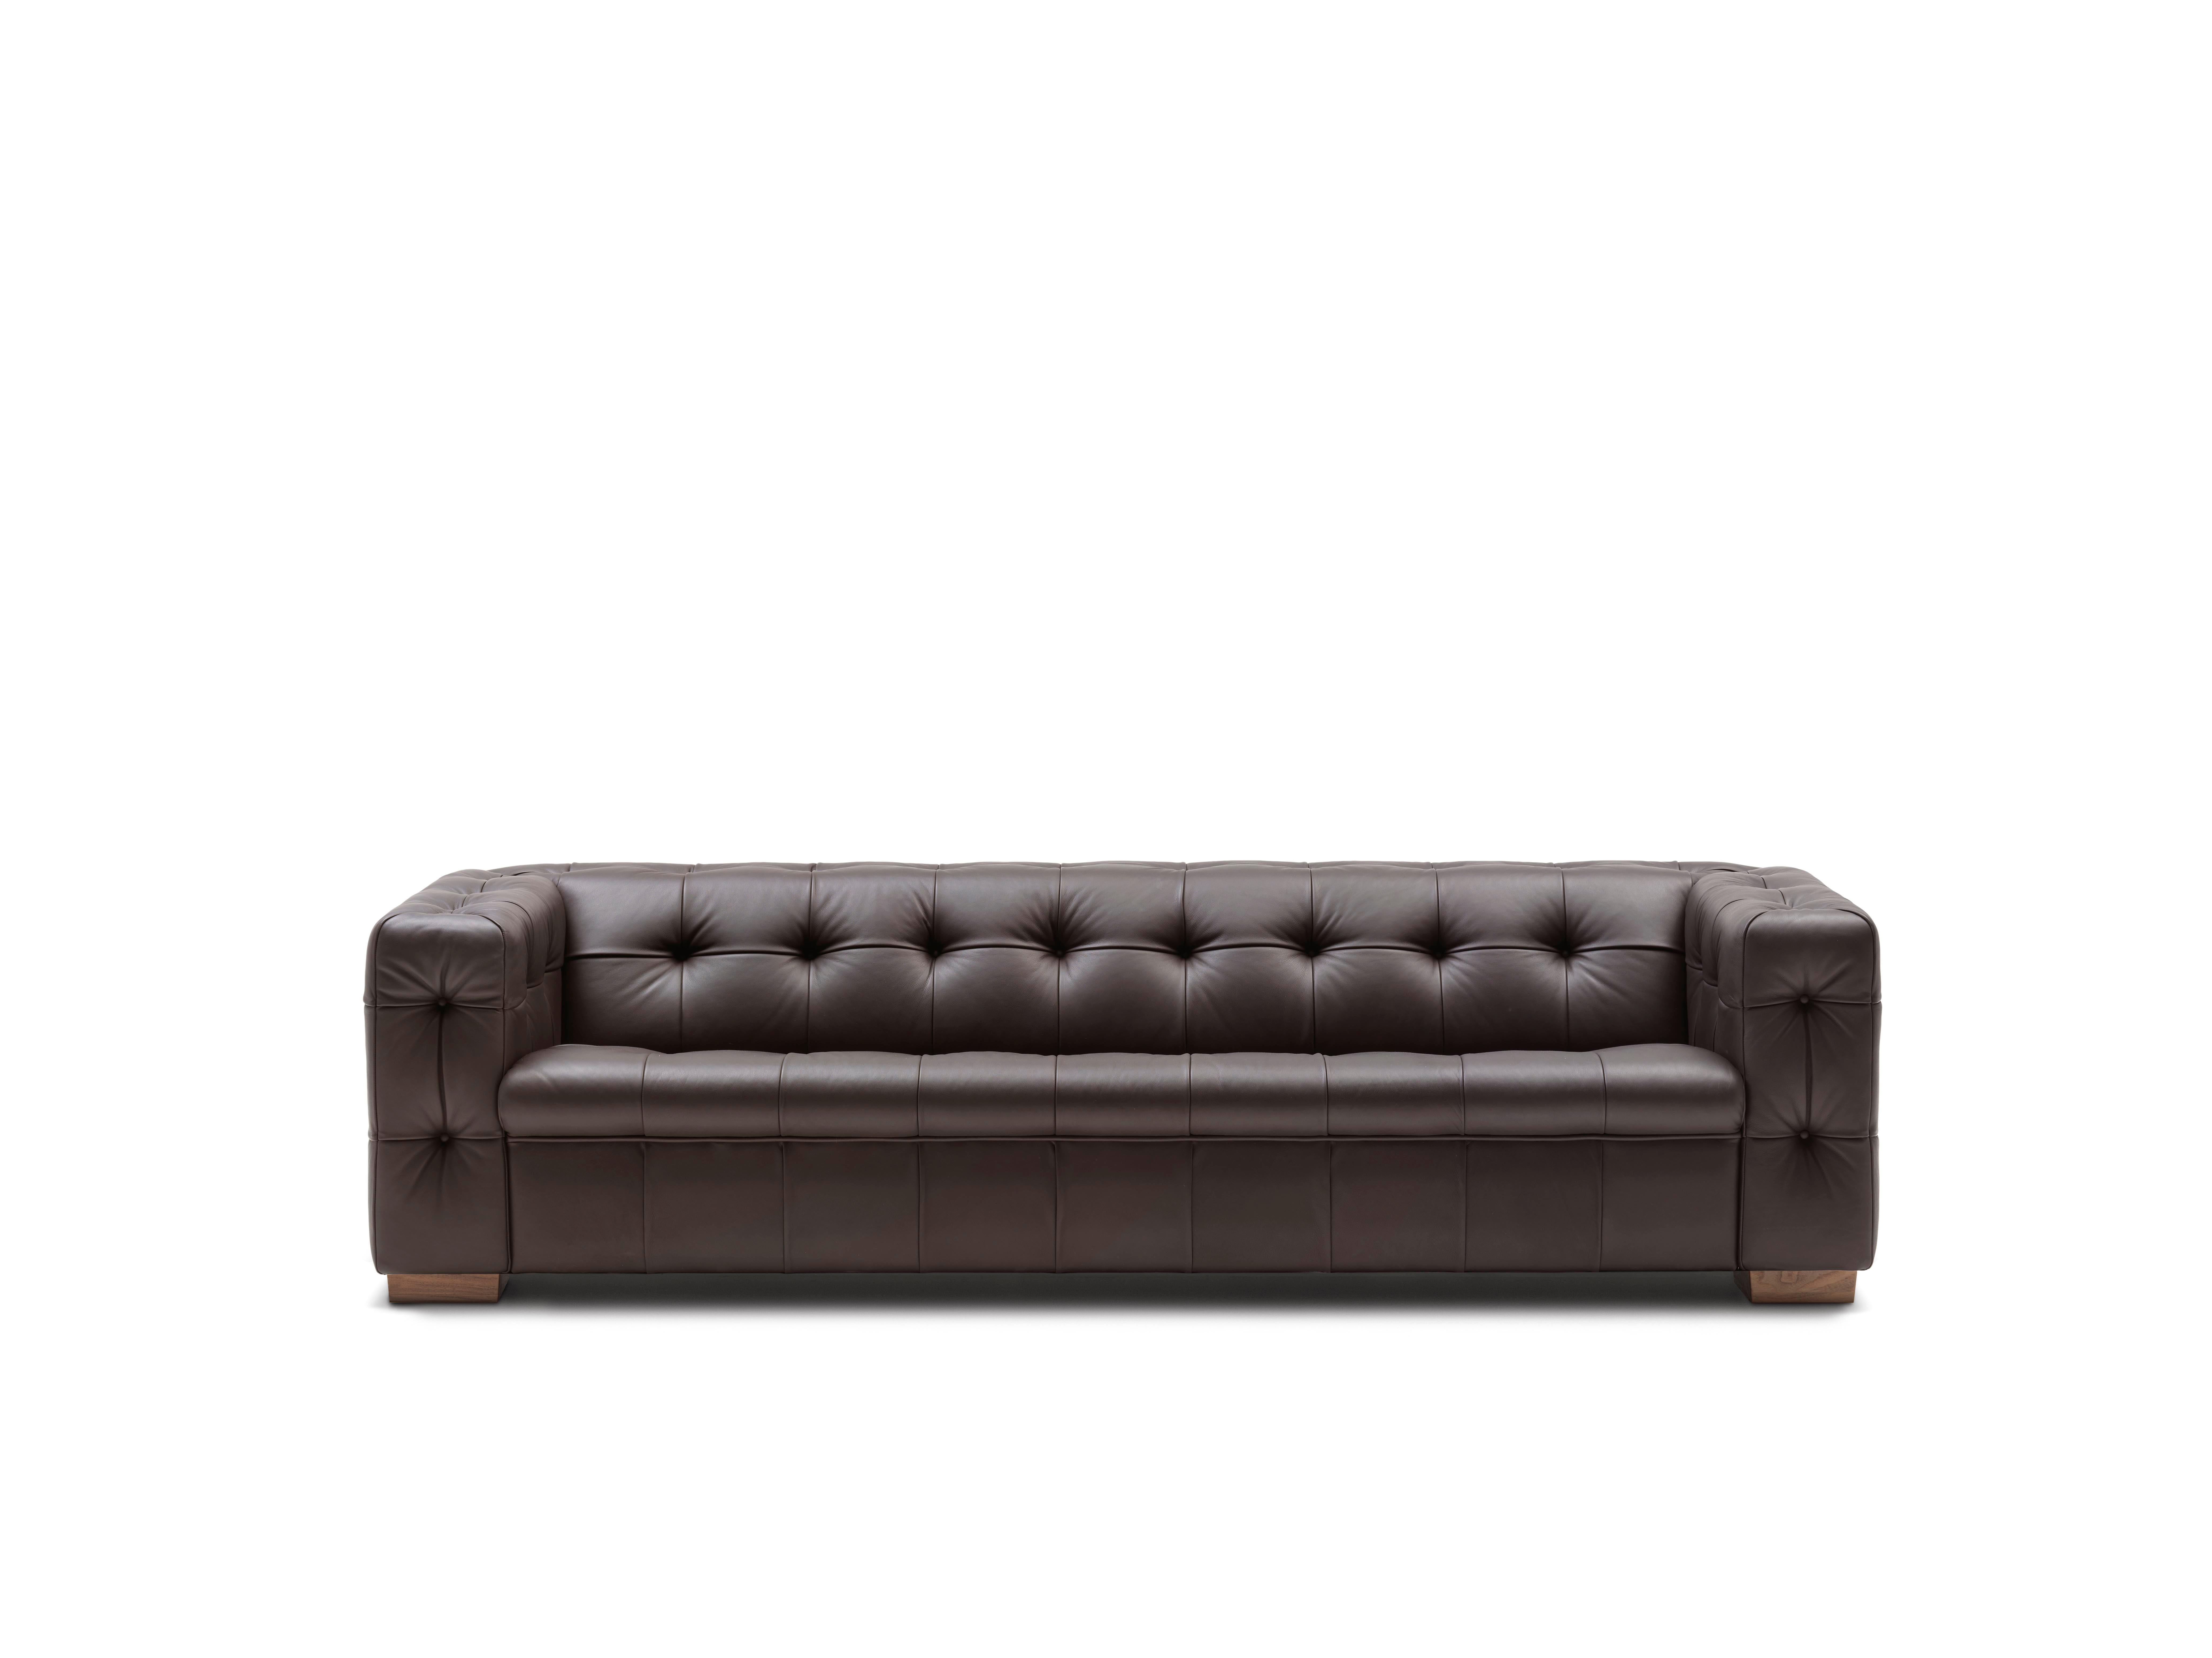 RH-306 sofa by De Sede
Dimensions: D 57 x W 248 x H 65 cm
Materials: High-gloss chrome-plated metal feet. SEDEX upholstery with wadding cushion (leather). 

Prices may change according to the chosen materials and size. 

Relaunch and update of